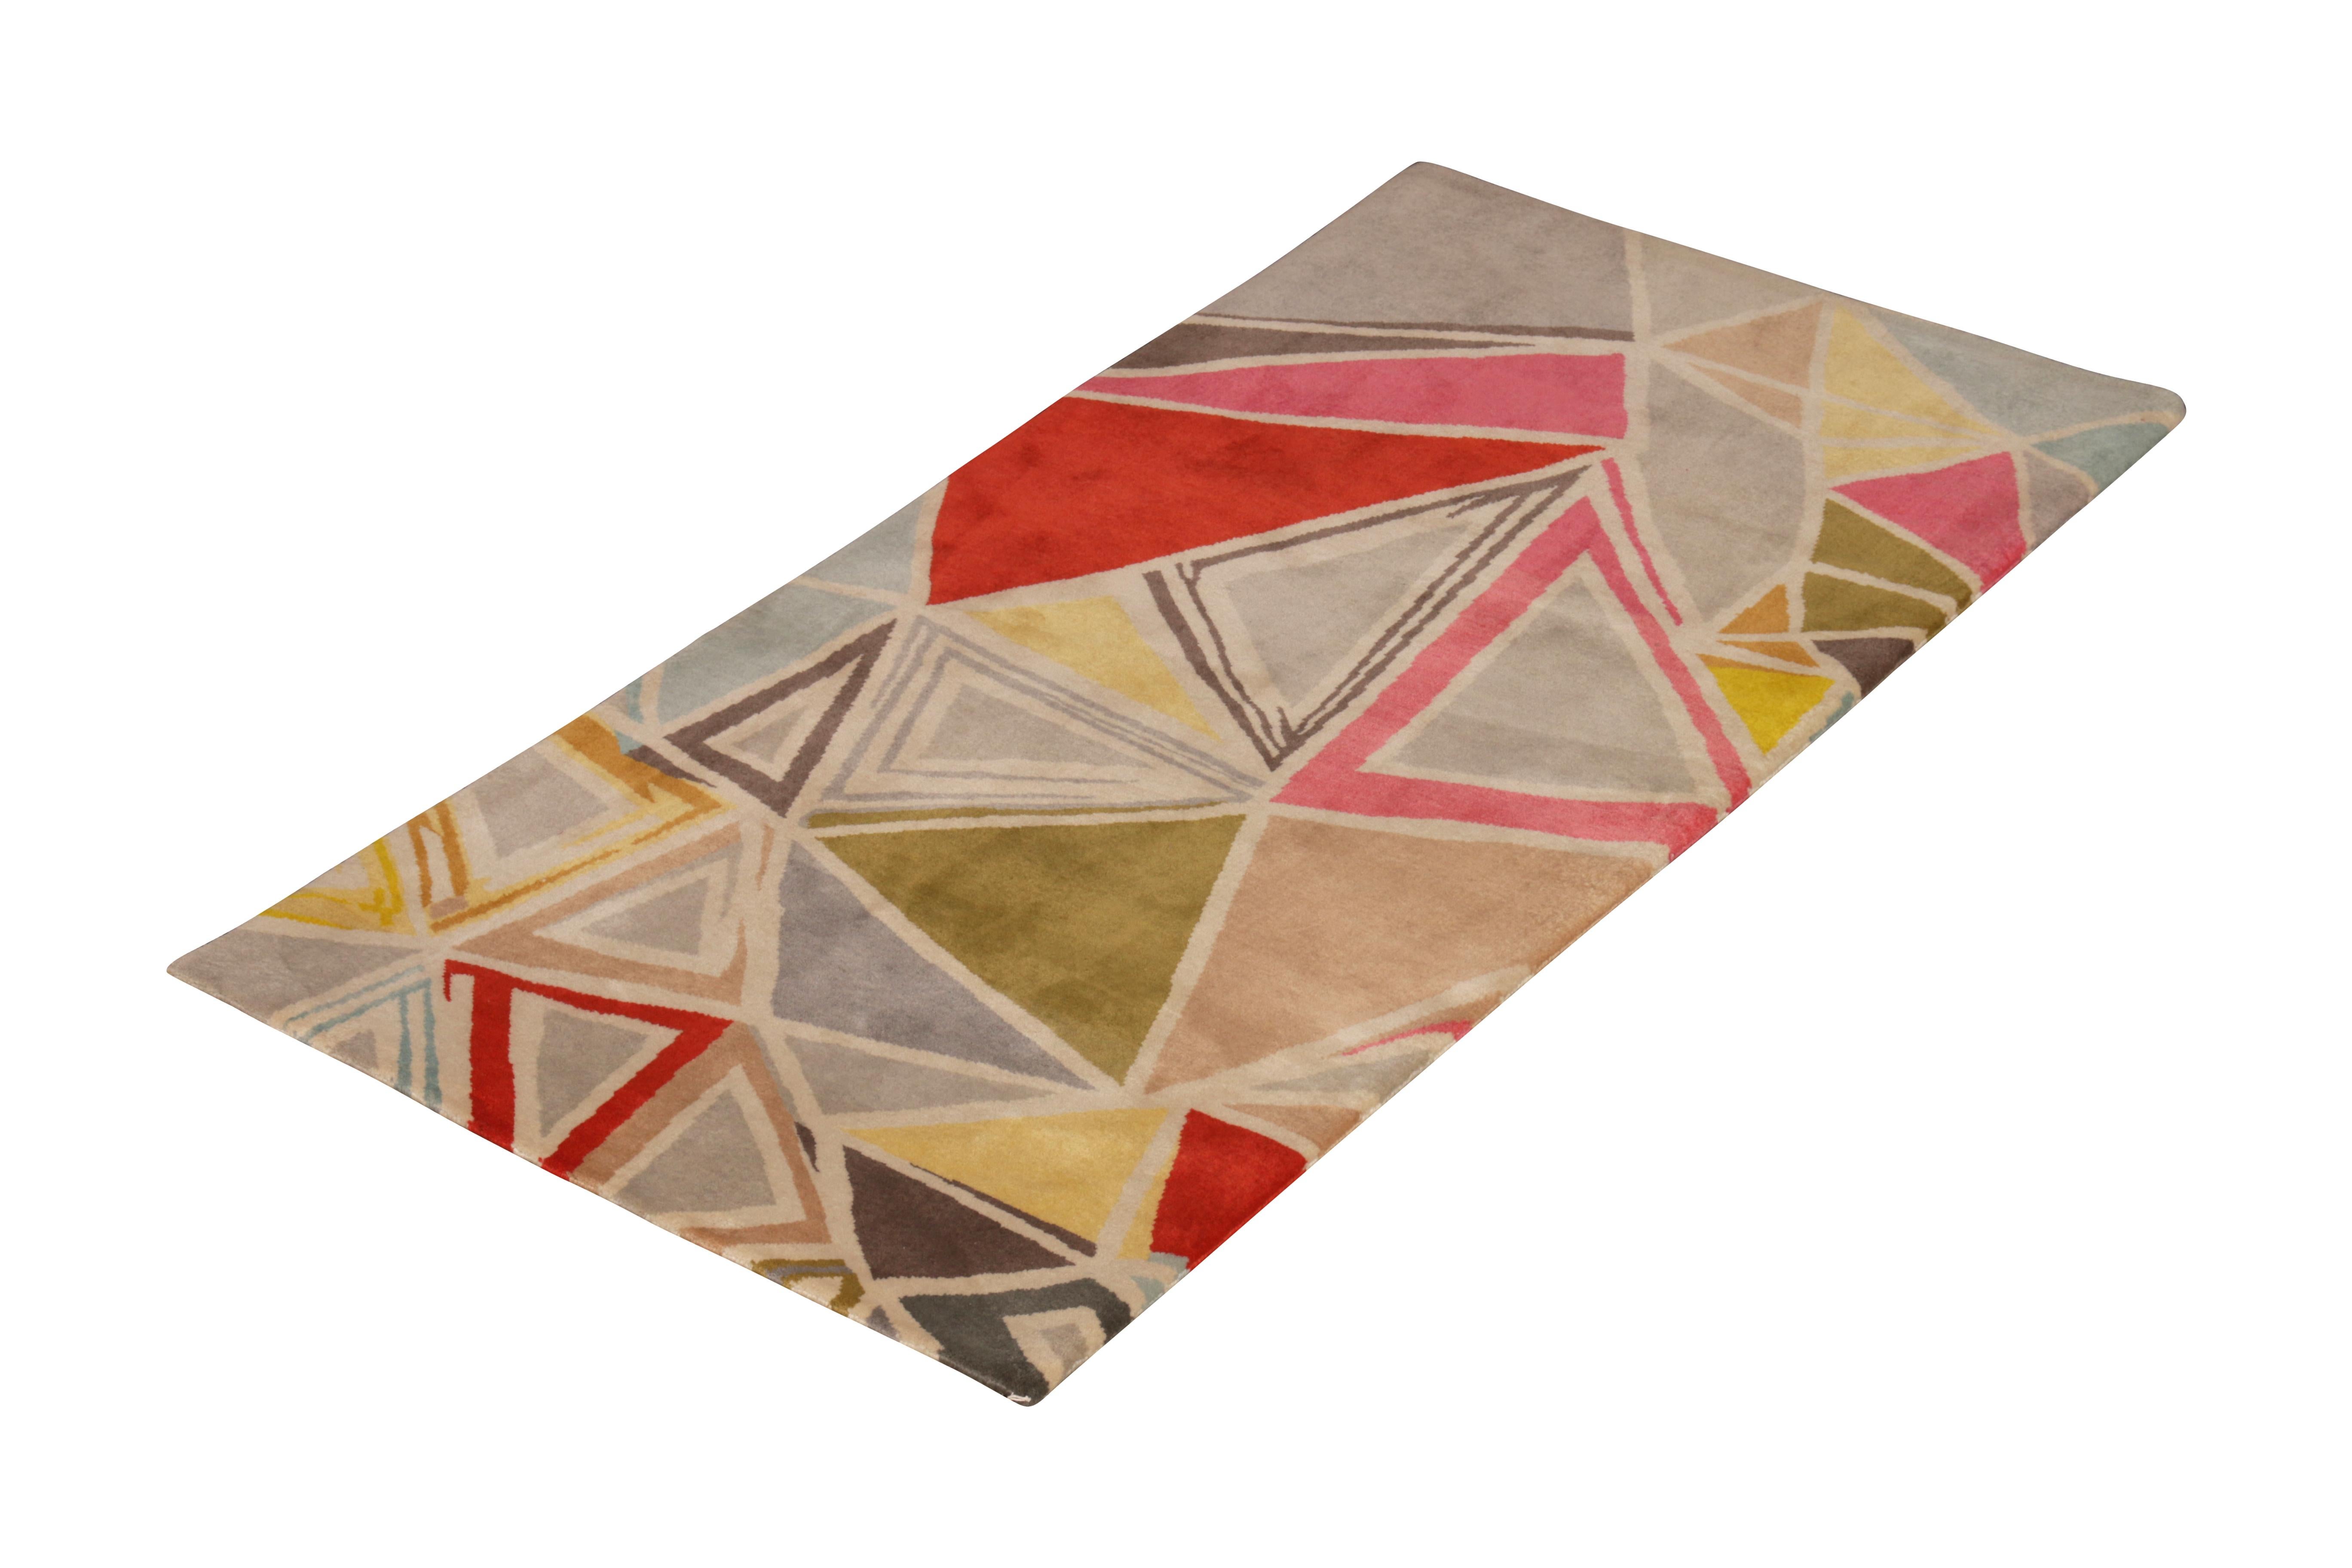 Made with hand knotted wool, this geometric run joins the latest additions to Rug & Kilim’s Mid-Century Modern collection, a bold custom-capable line recapturing an underrepresented, iconic period with an entirely new approach to large scale,